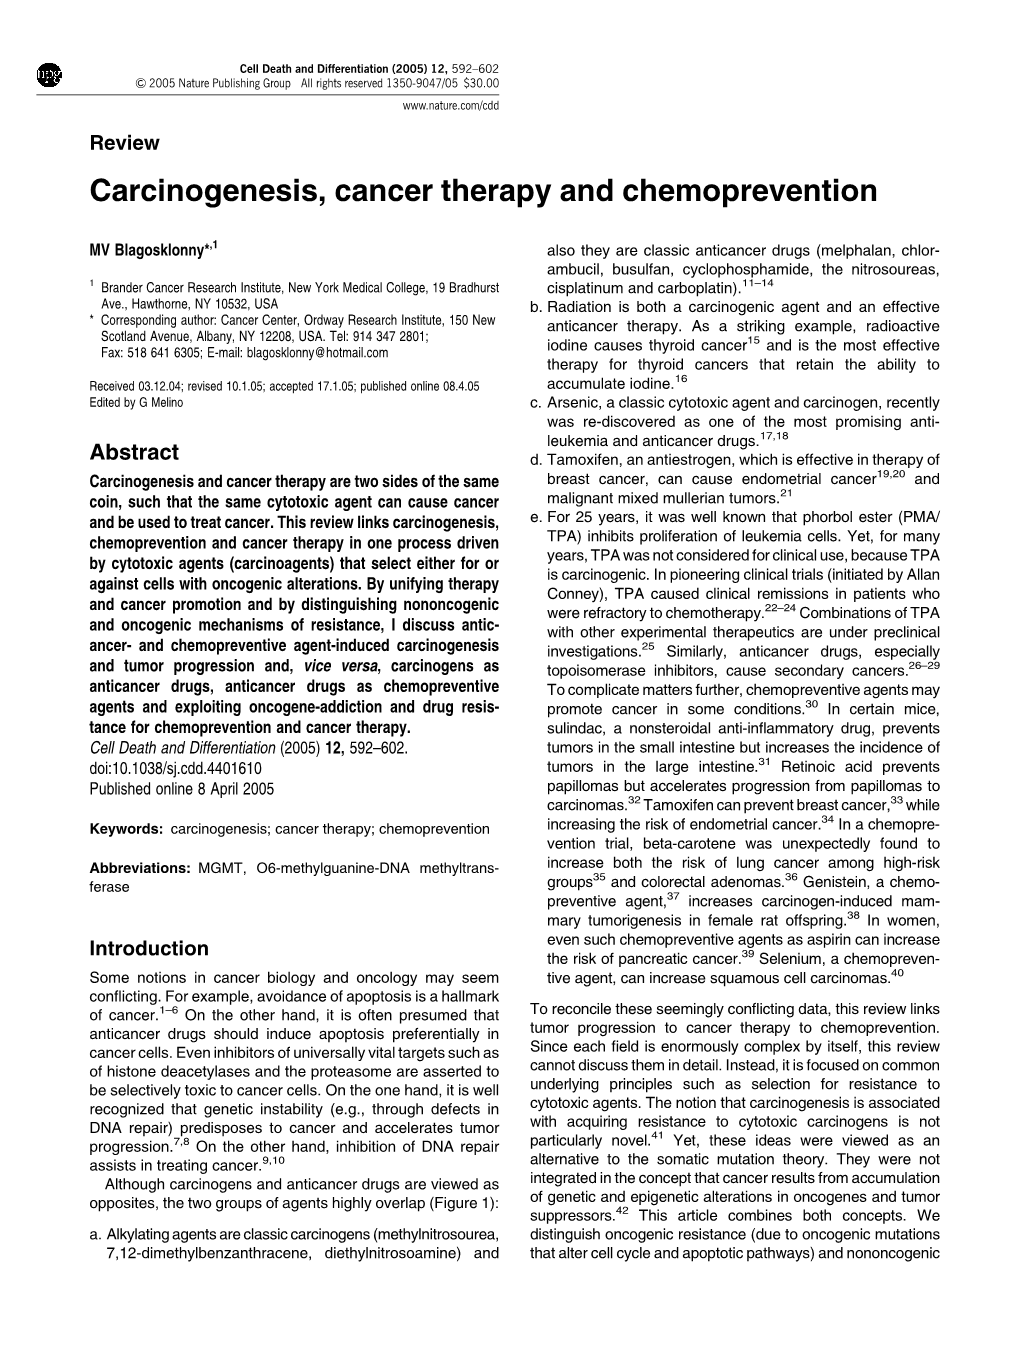 Carcinogenesis, Cancer Therapy and Chemoprevention